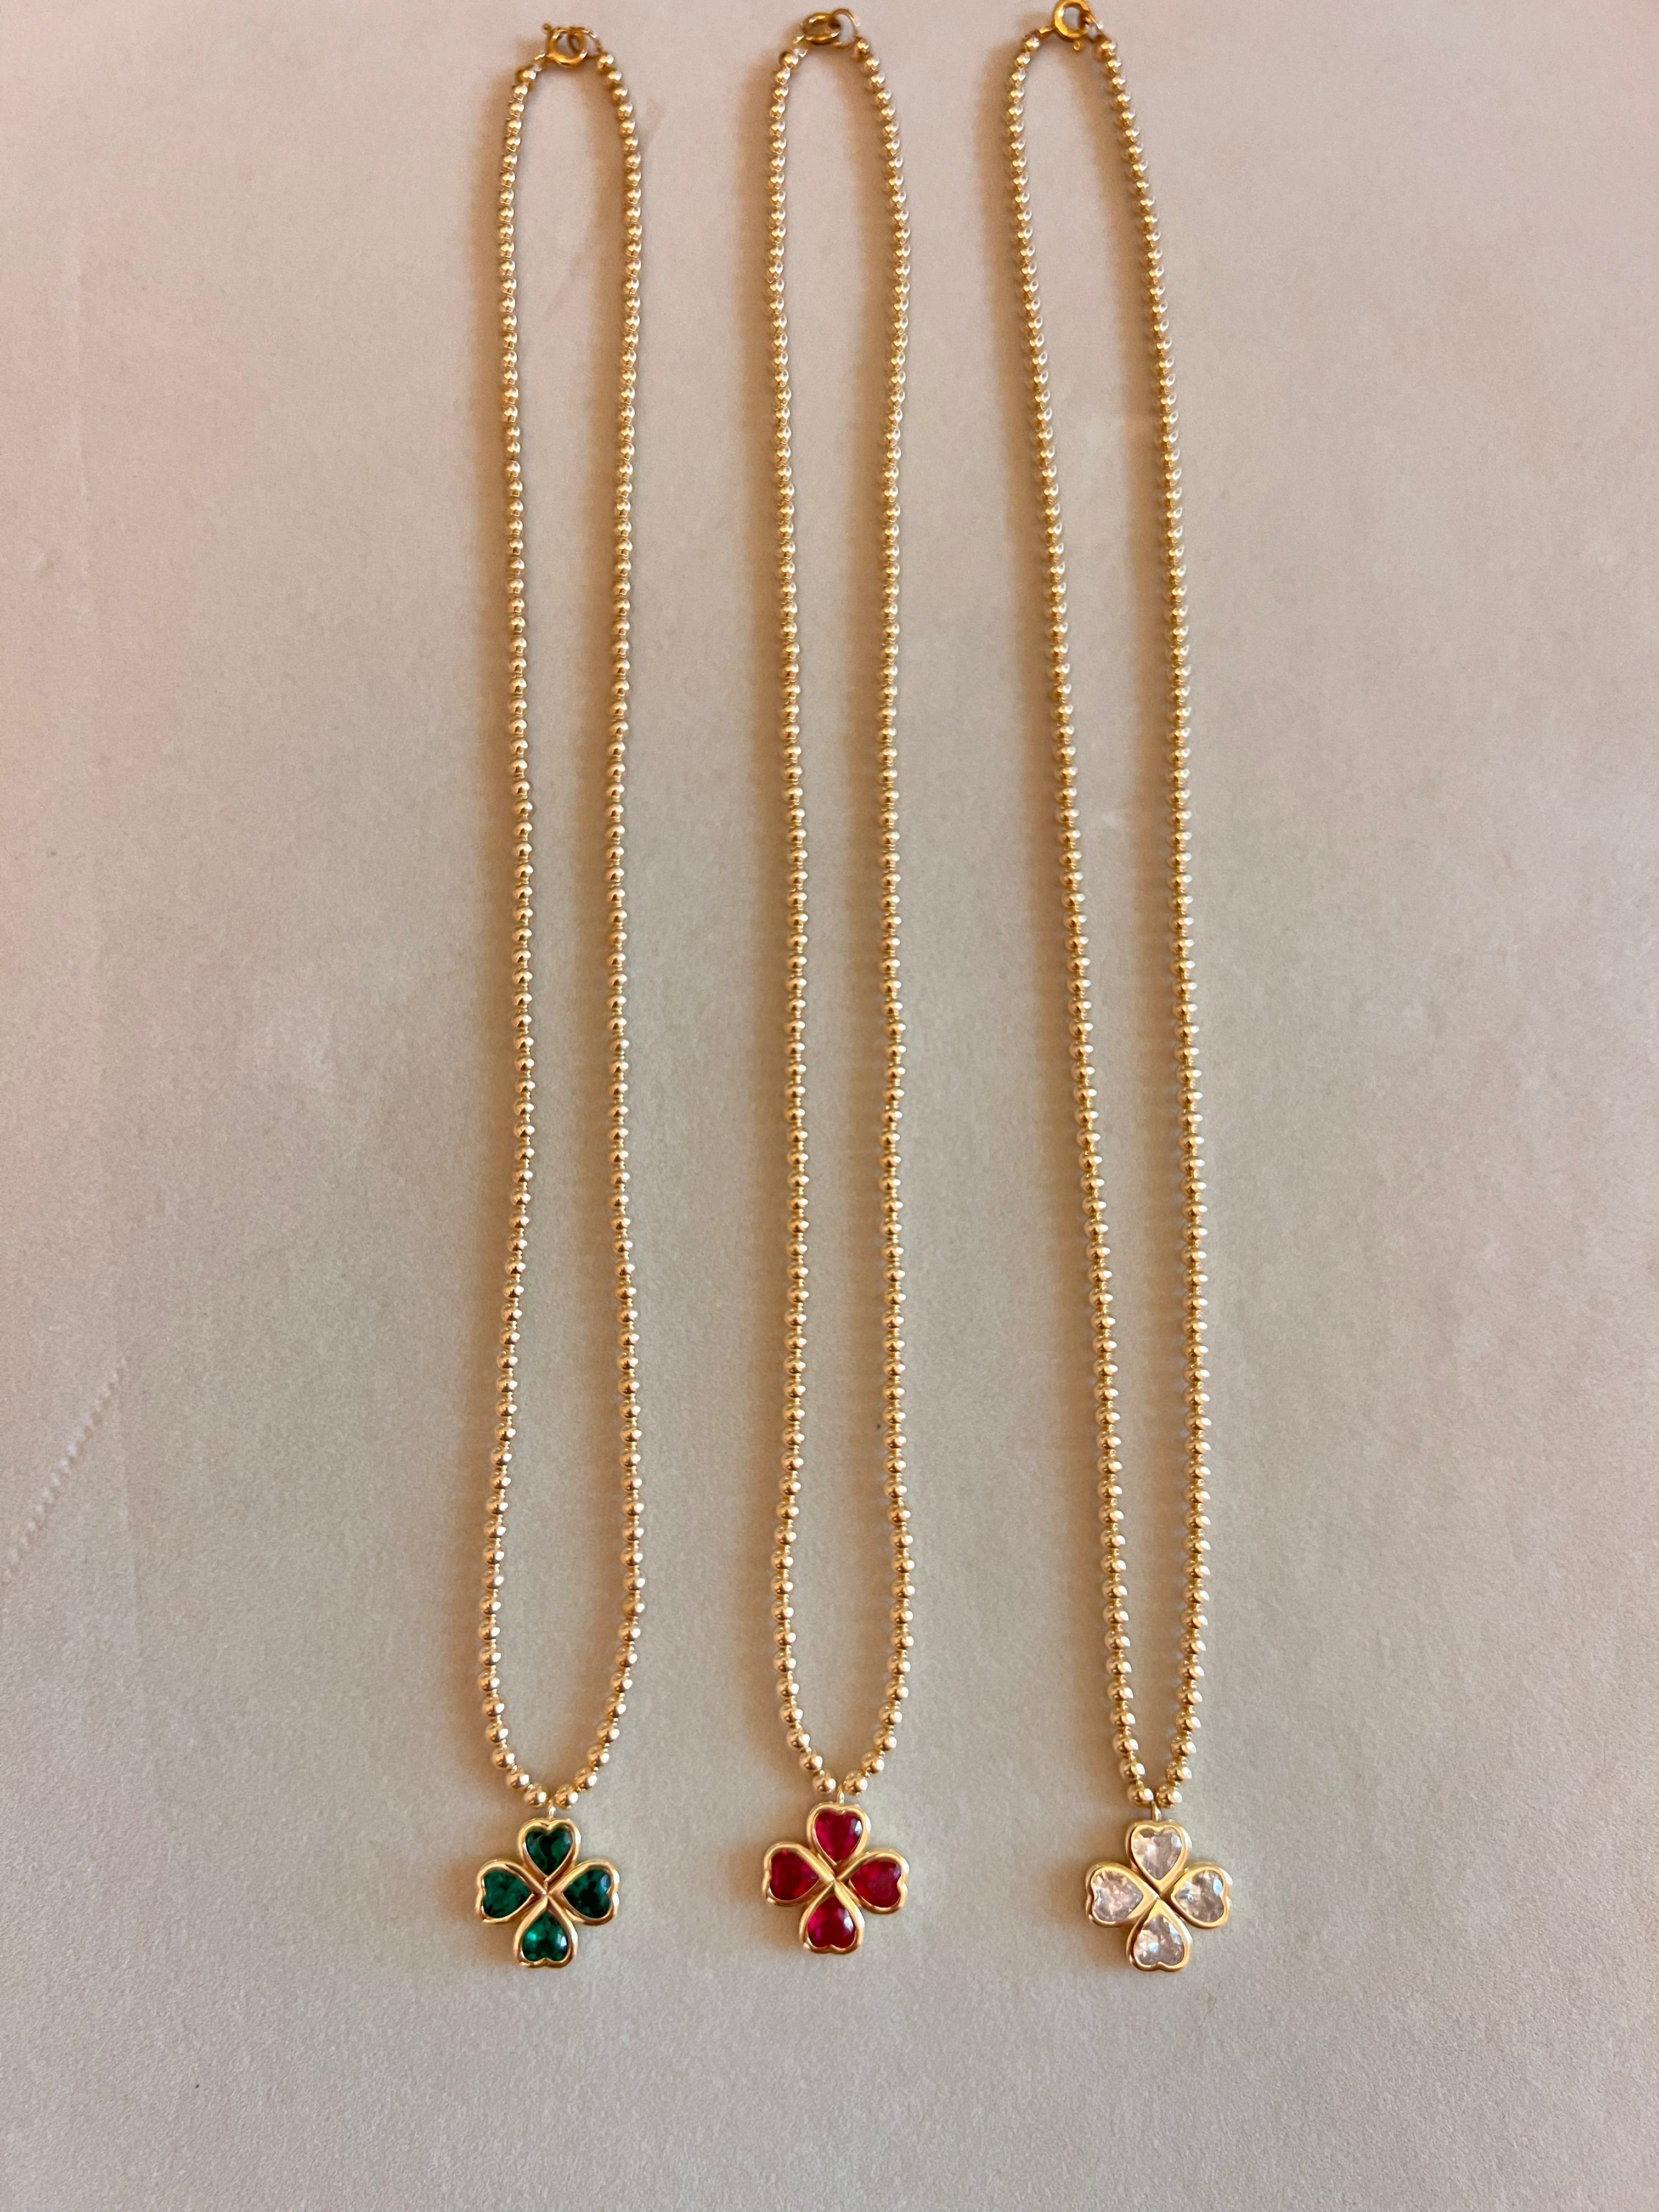 Yellow Gold Beaded Clover Necklaces